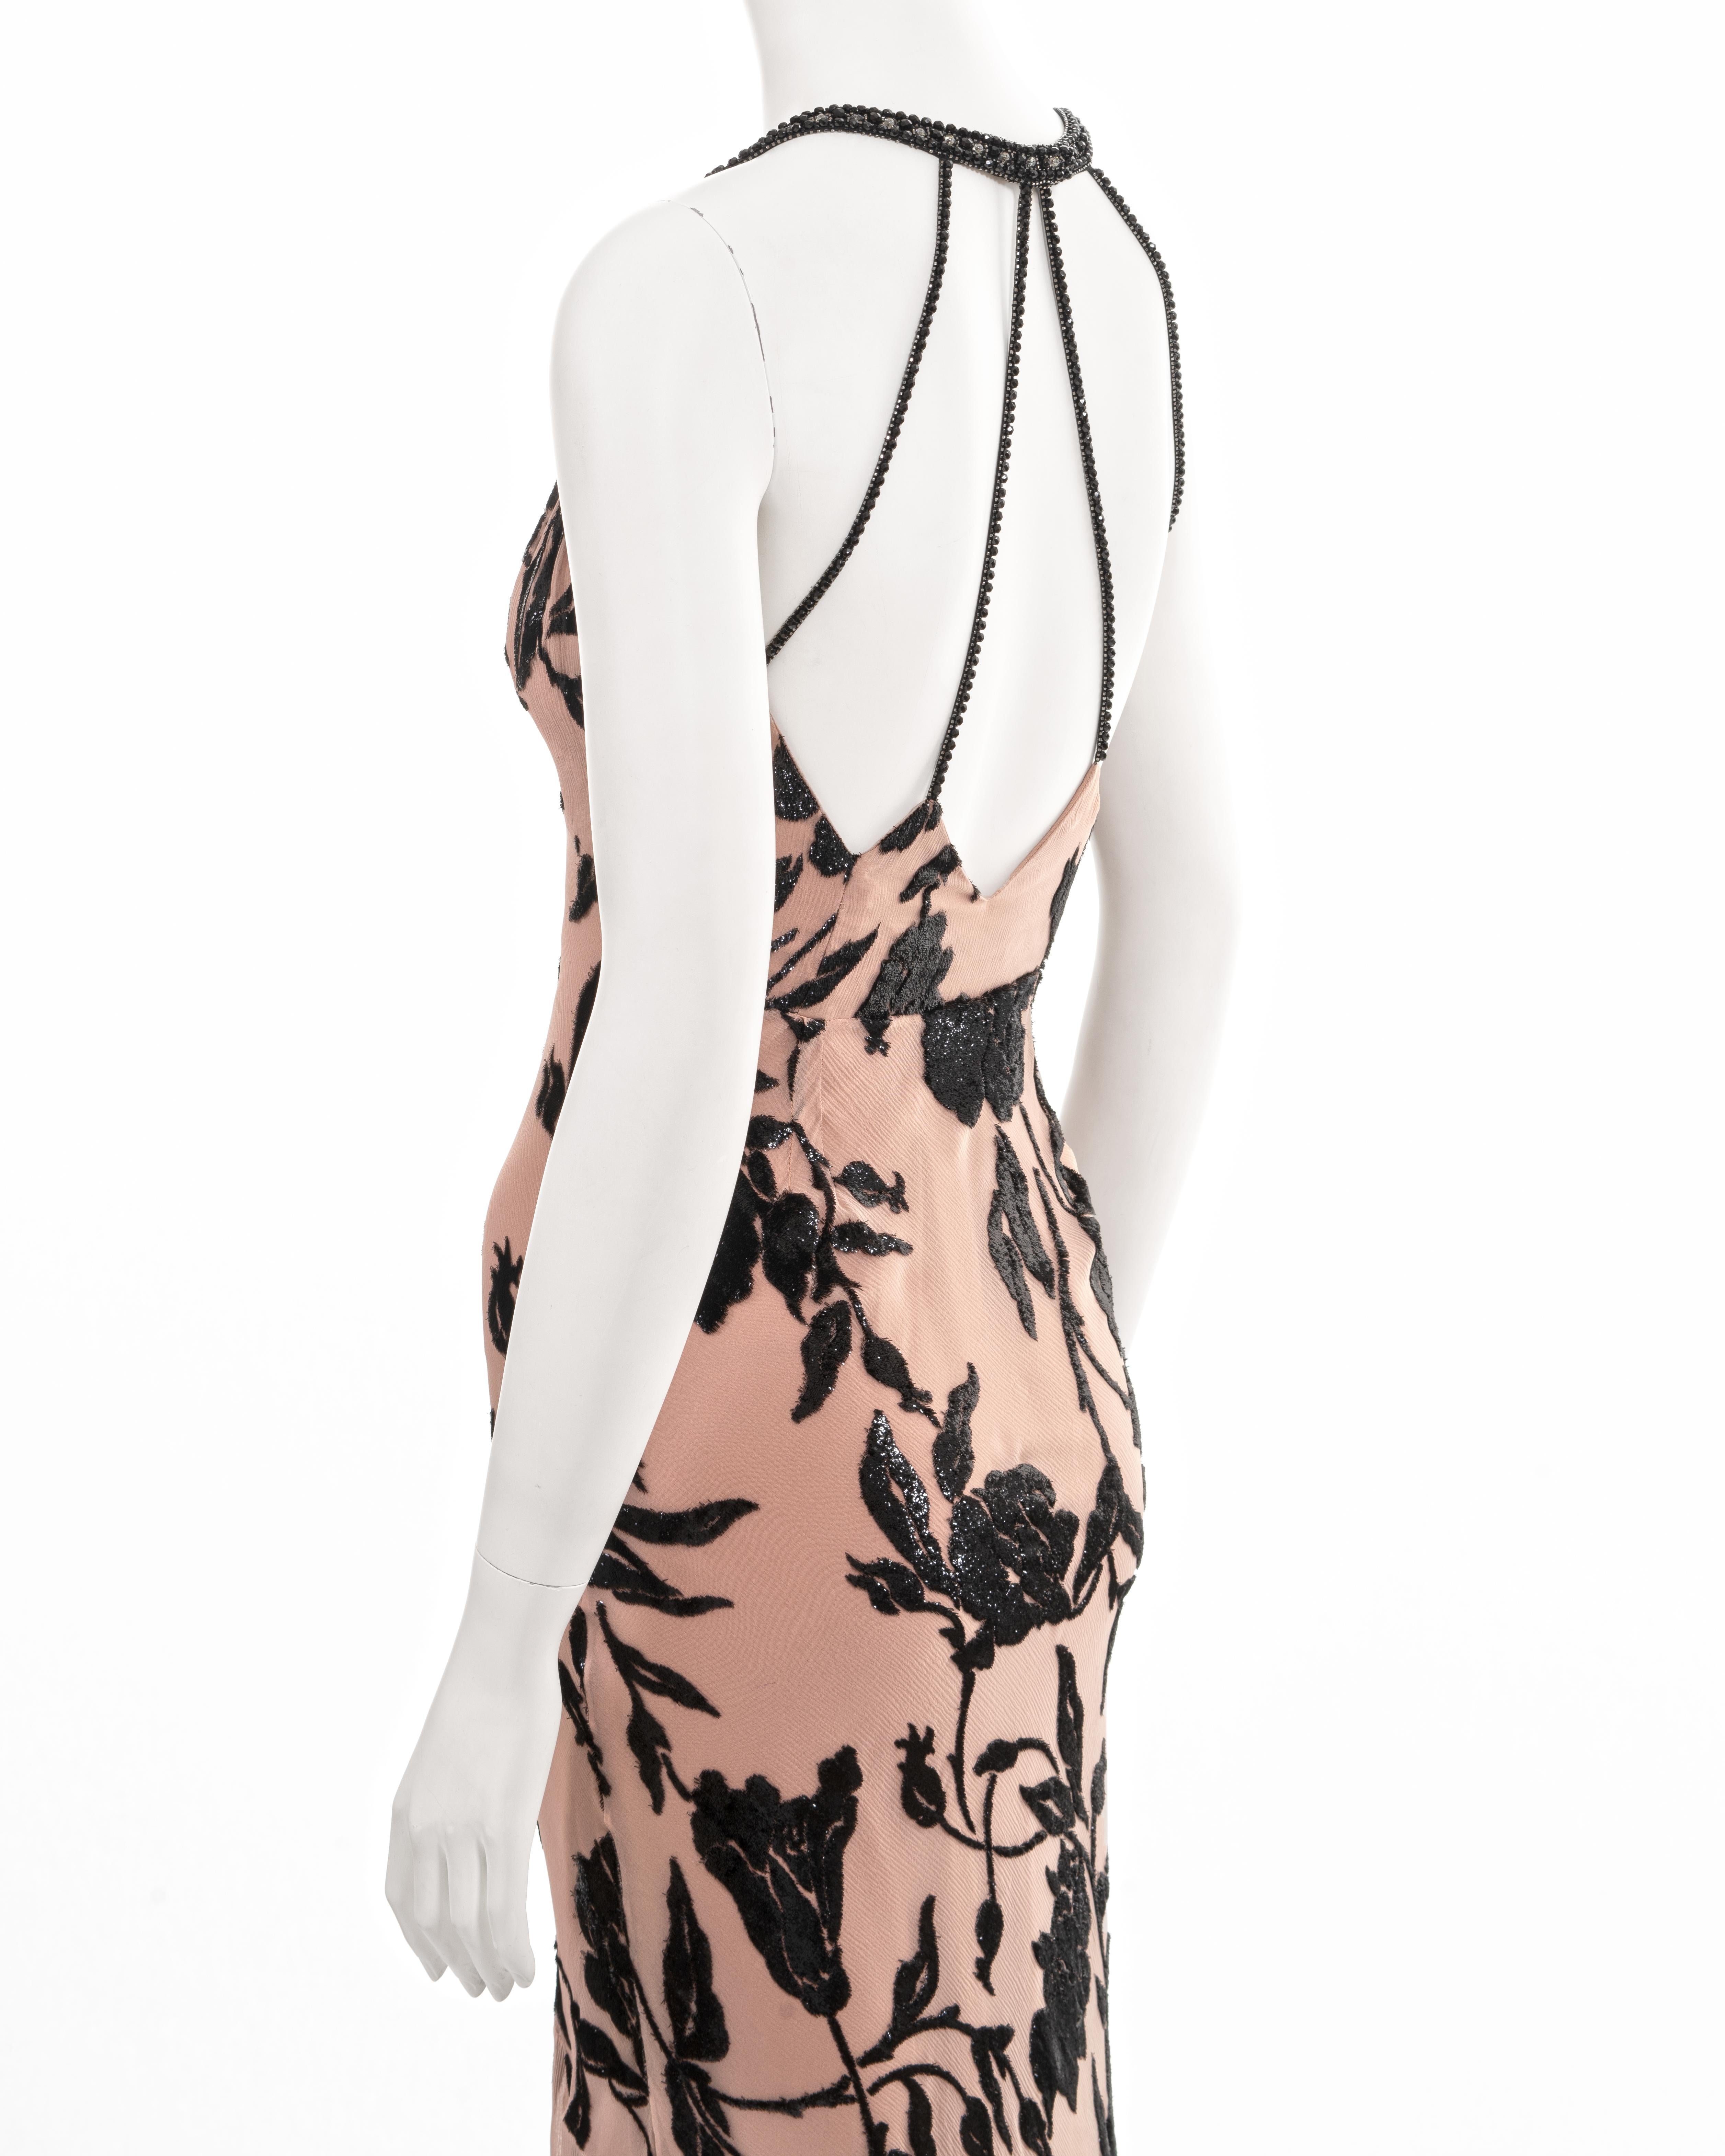 Christian Dior by John Galliano dusty pink floral silk evening dress fw 2010 For Sale 4